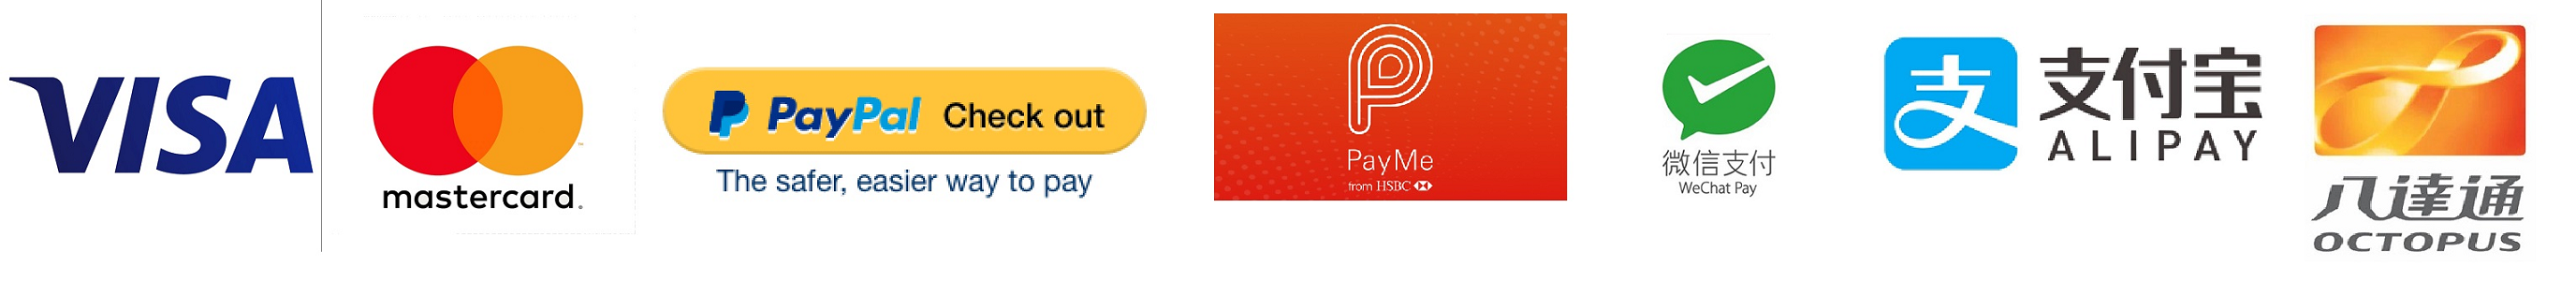 payment-updated-1.png